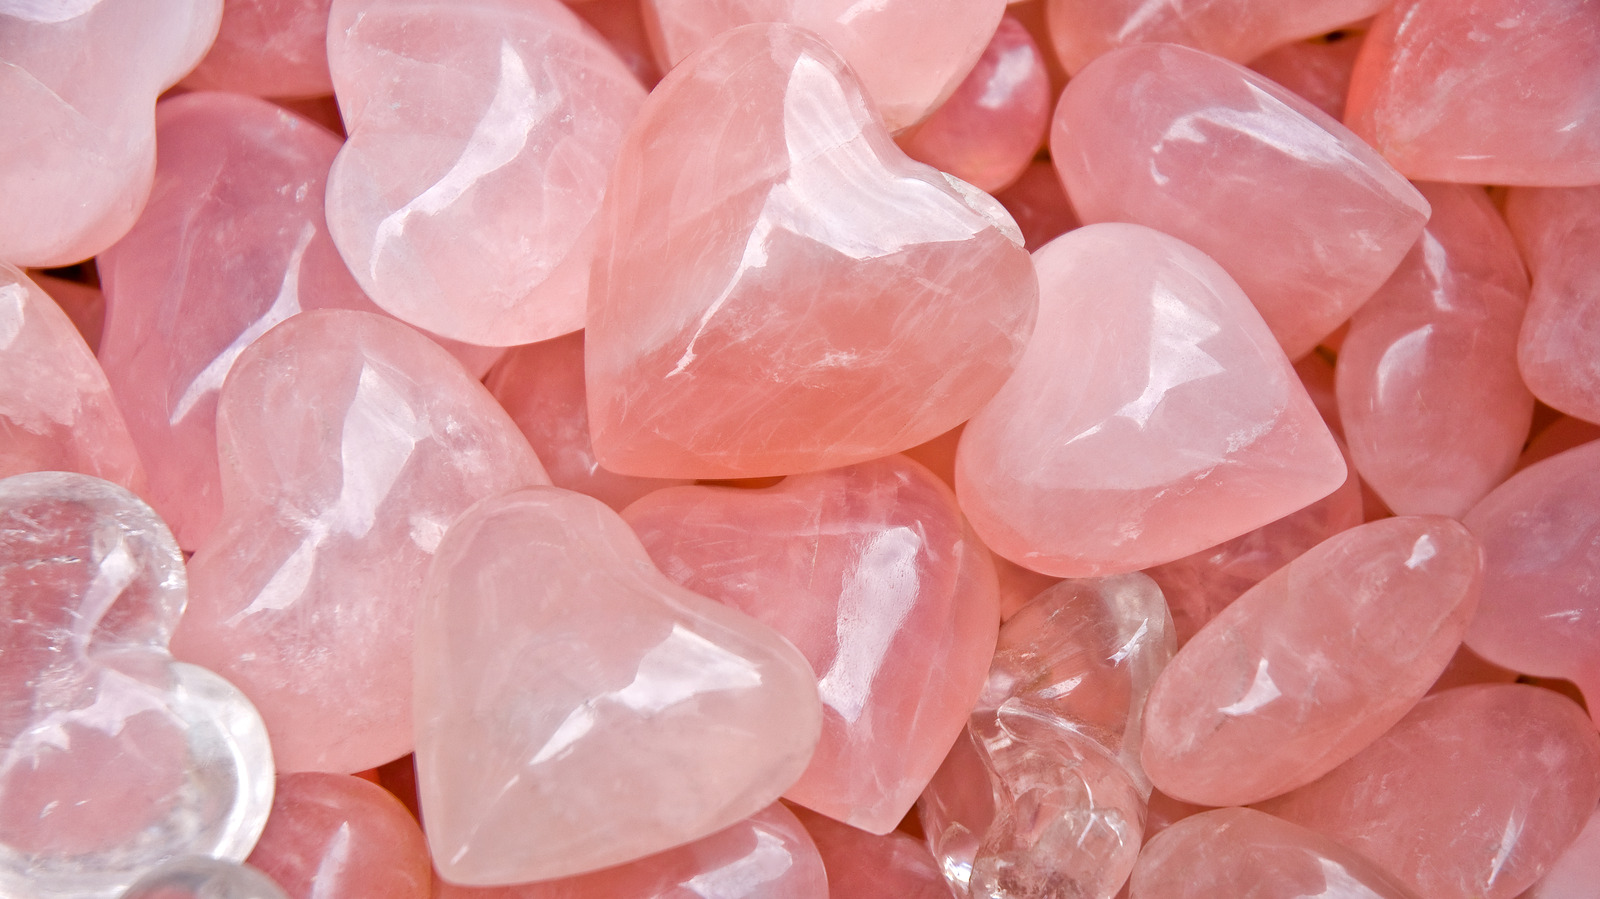 How to use rose quartz crystal in your bedroom to improve your love life